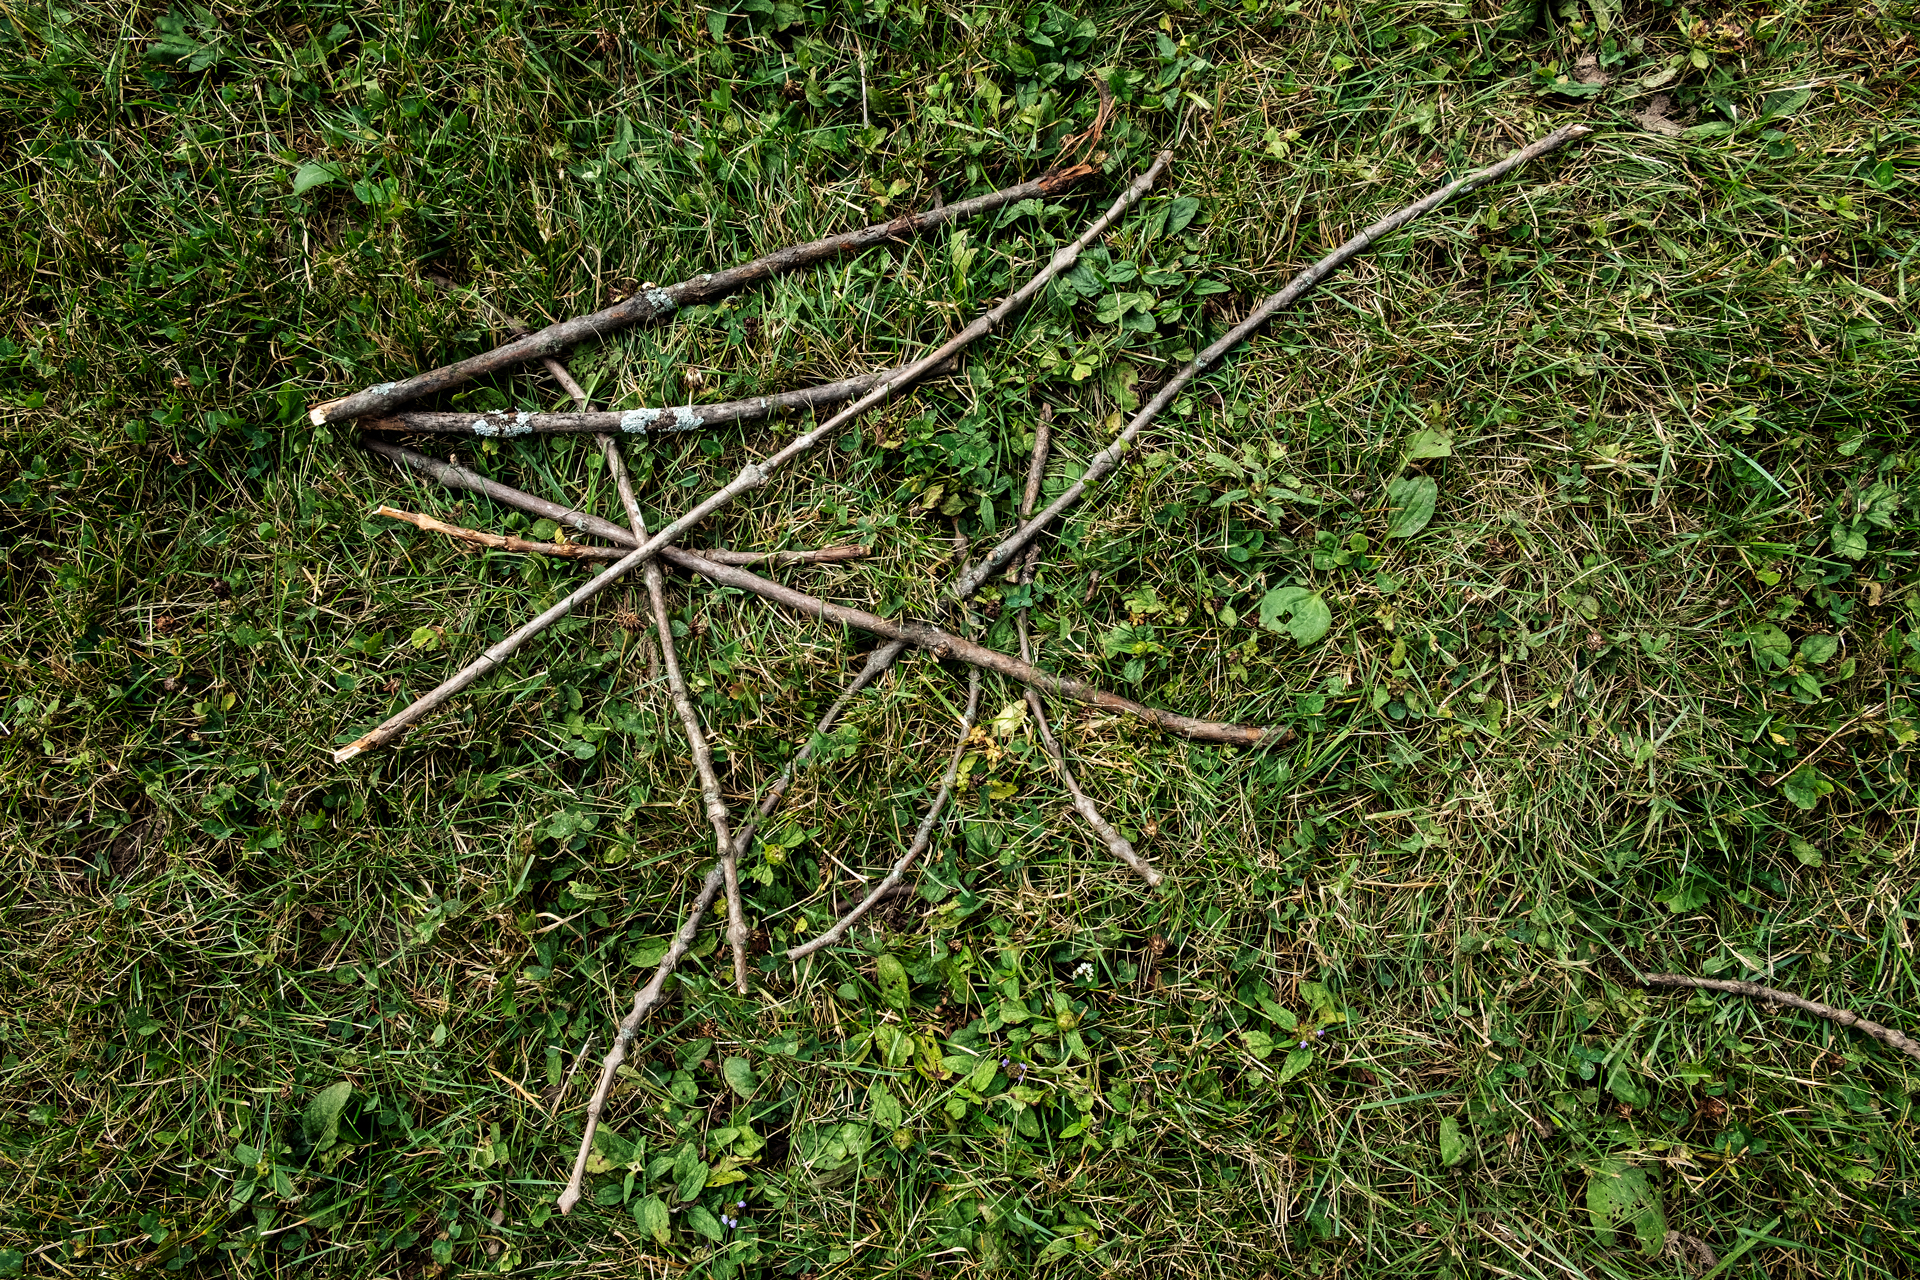 colour photo of ash tree branch pieces on the grass